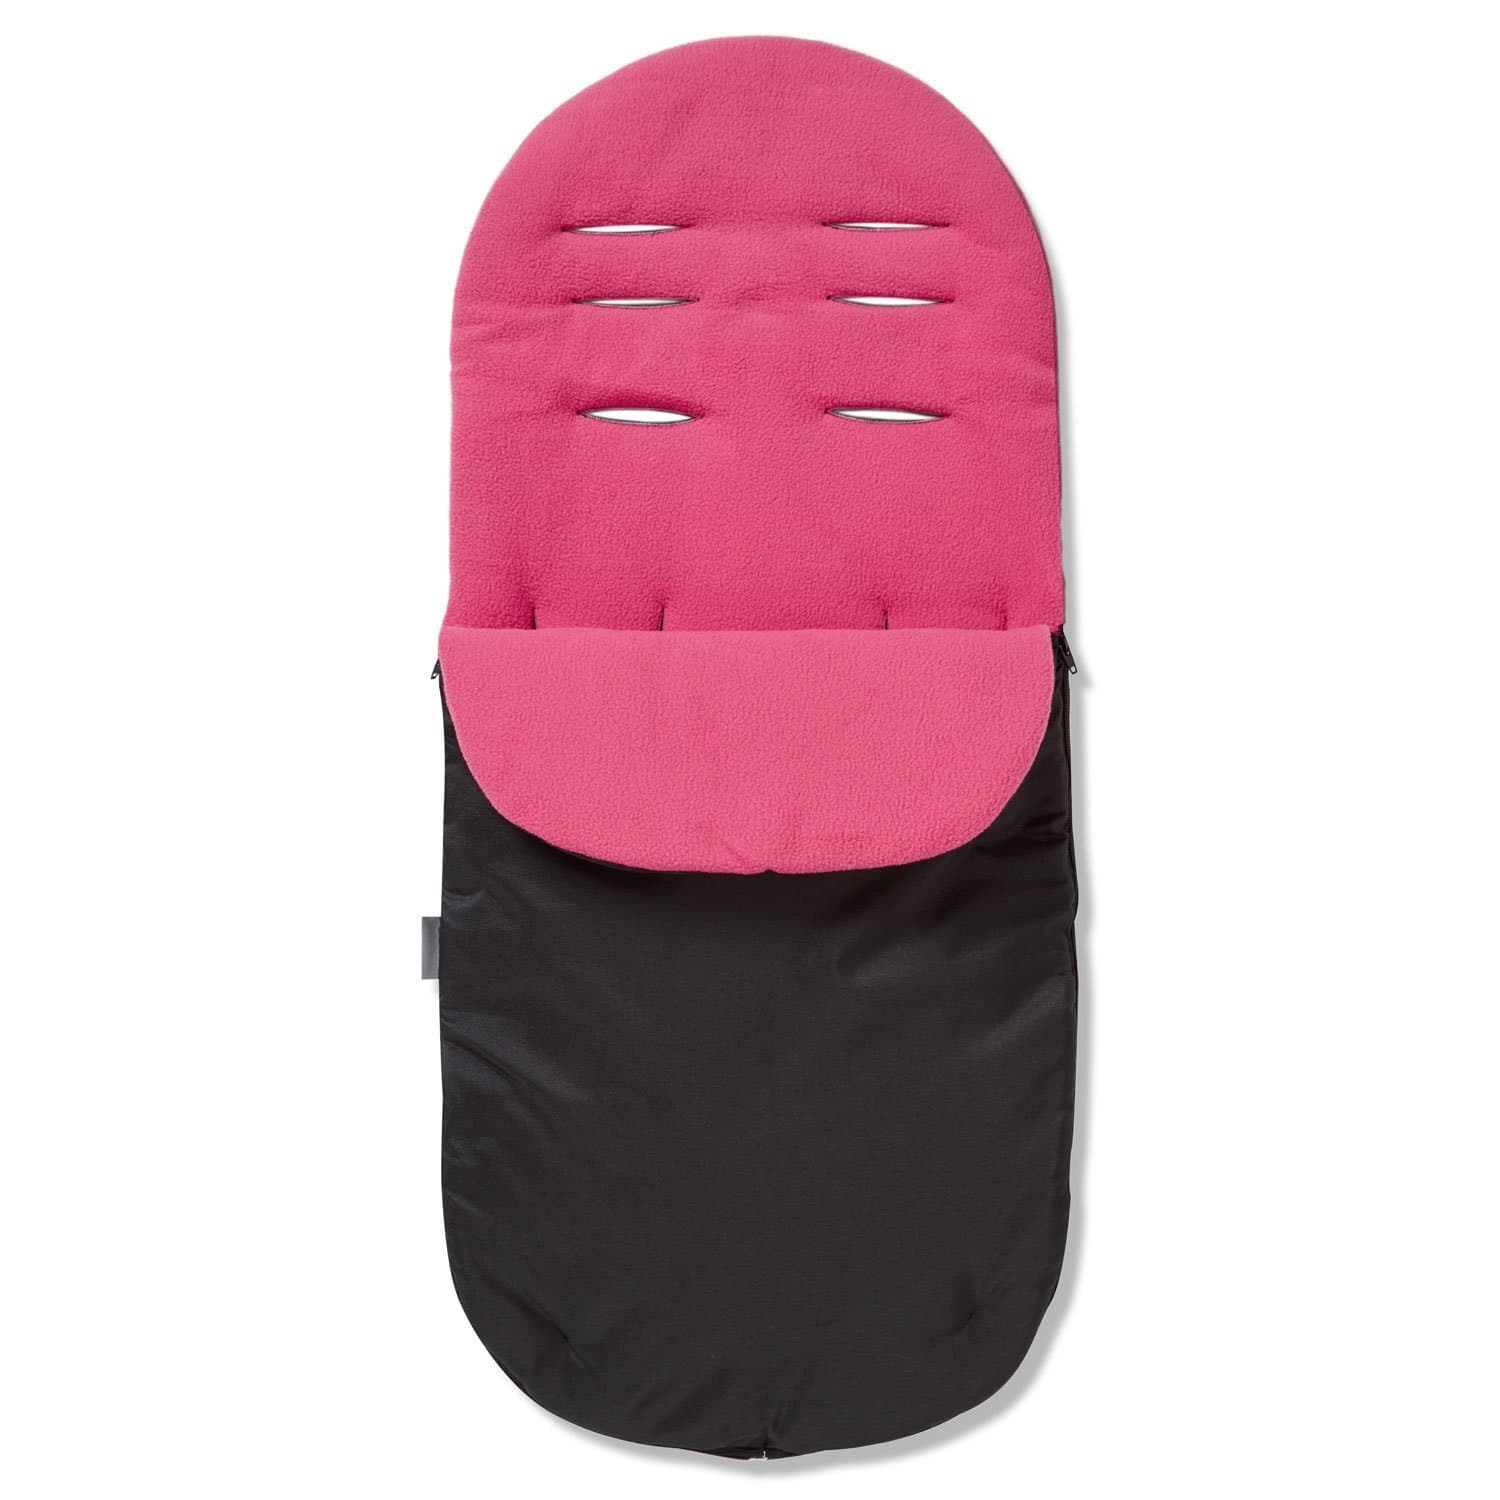 Footmuff / Cosy Toes Compatible with Kiddy - Dark Pink / Fits All Models | For Your Little One